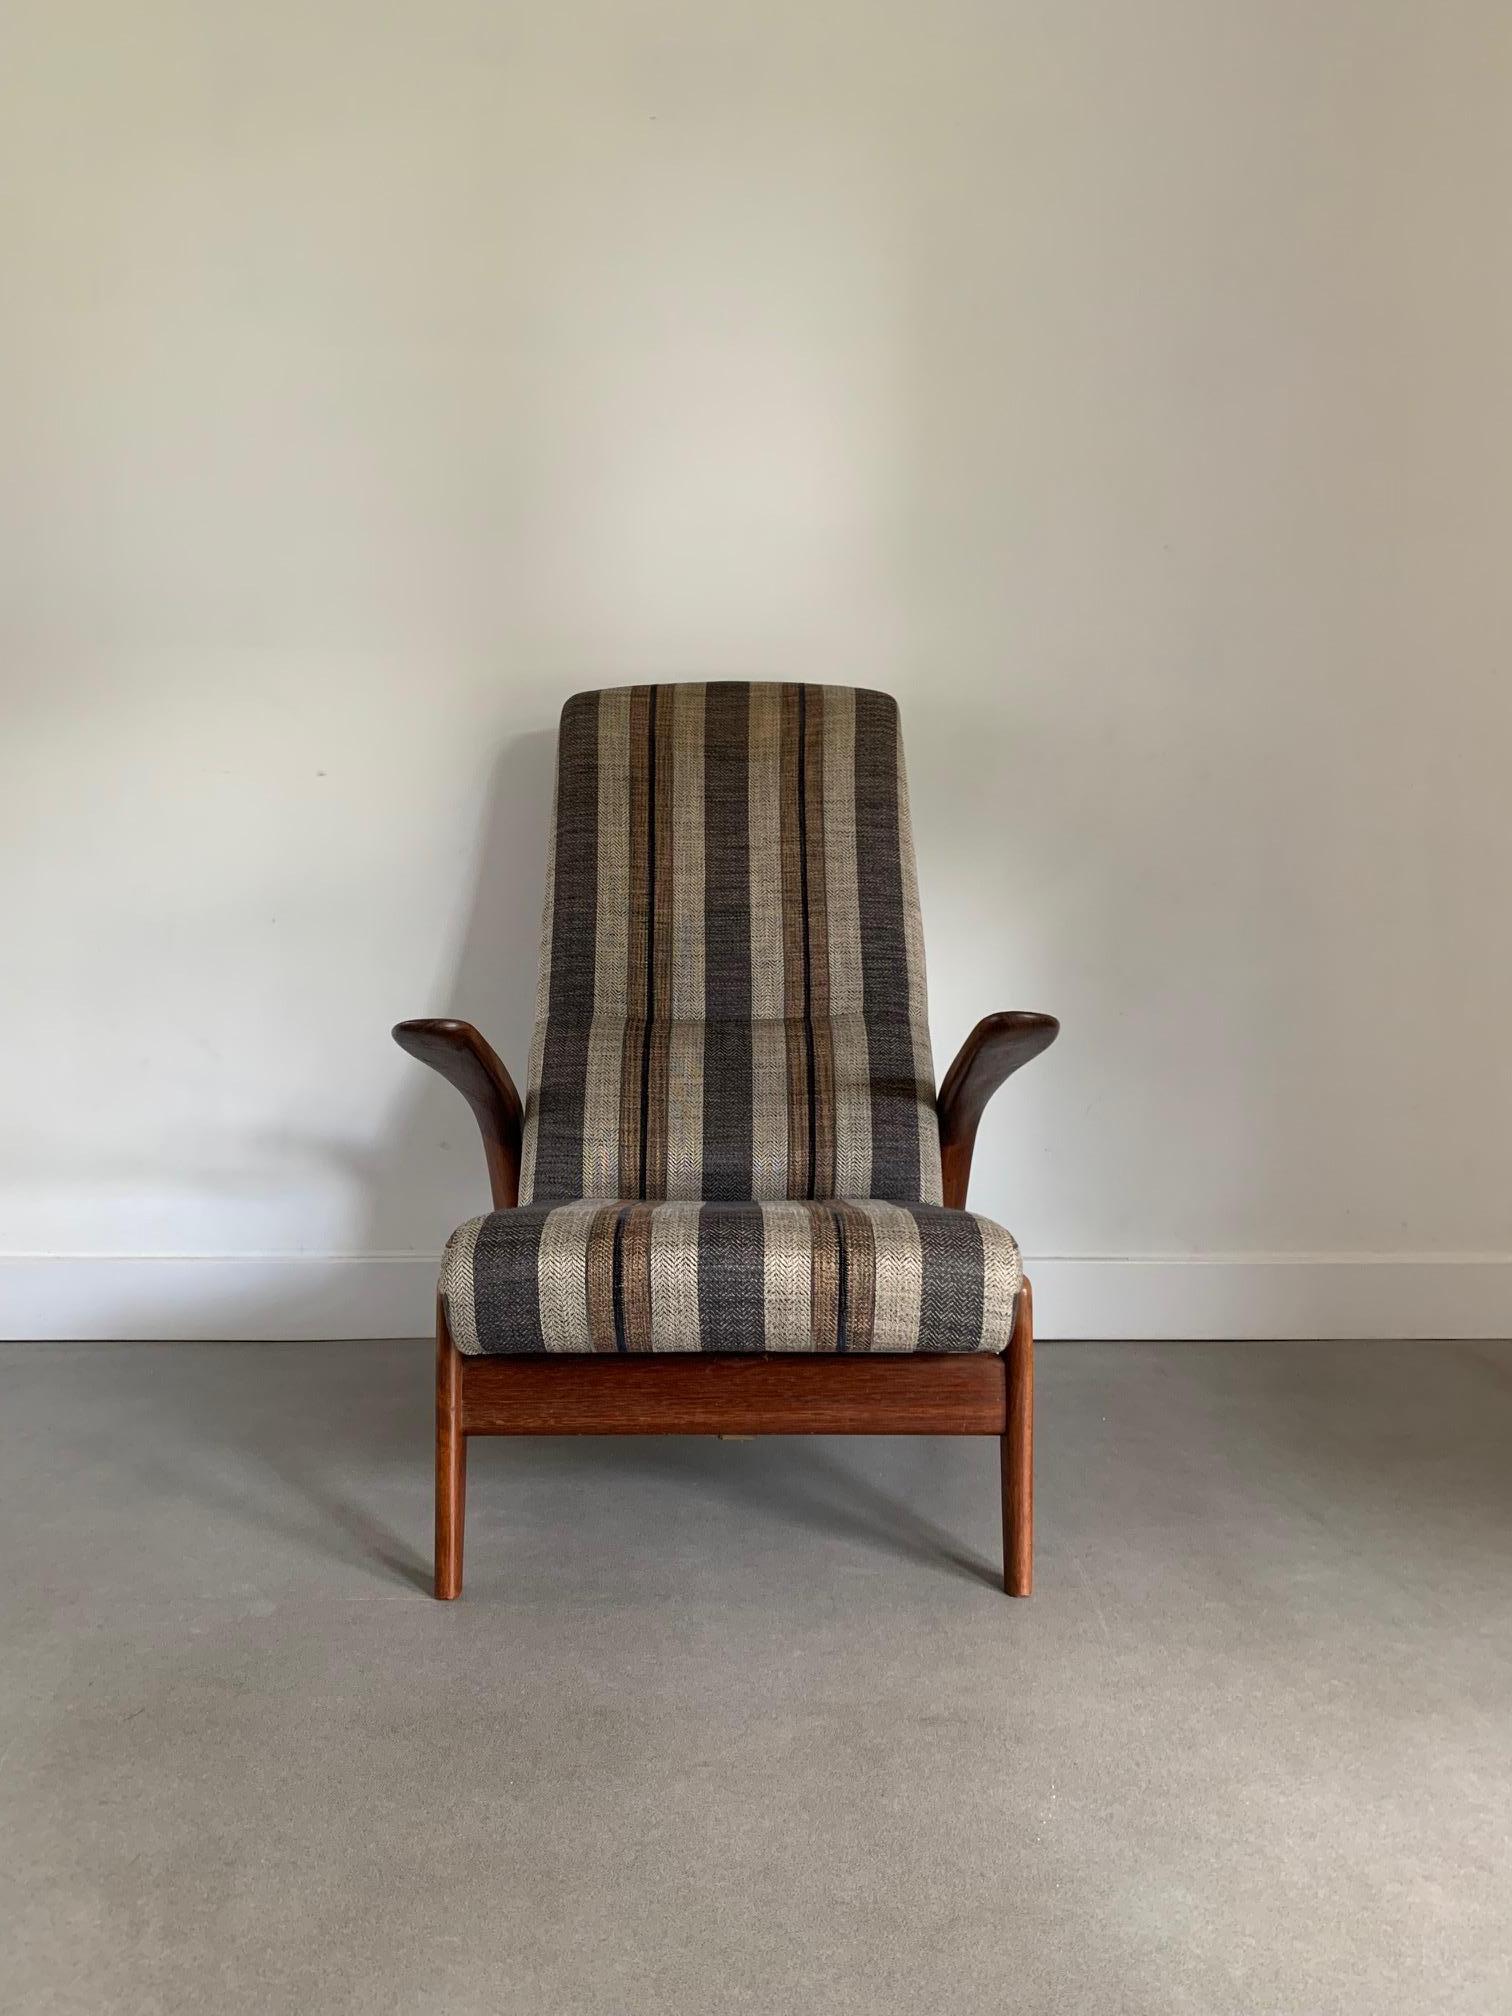 The Rock'n Rest easy chair by Rastad & Relling is a classic and iconic design in Scandinavian furniture. This rocking chair was designed by the Norwegian designers Nils Rastad and Anders Relling in the 1960s and has since become a symbol of